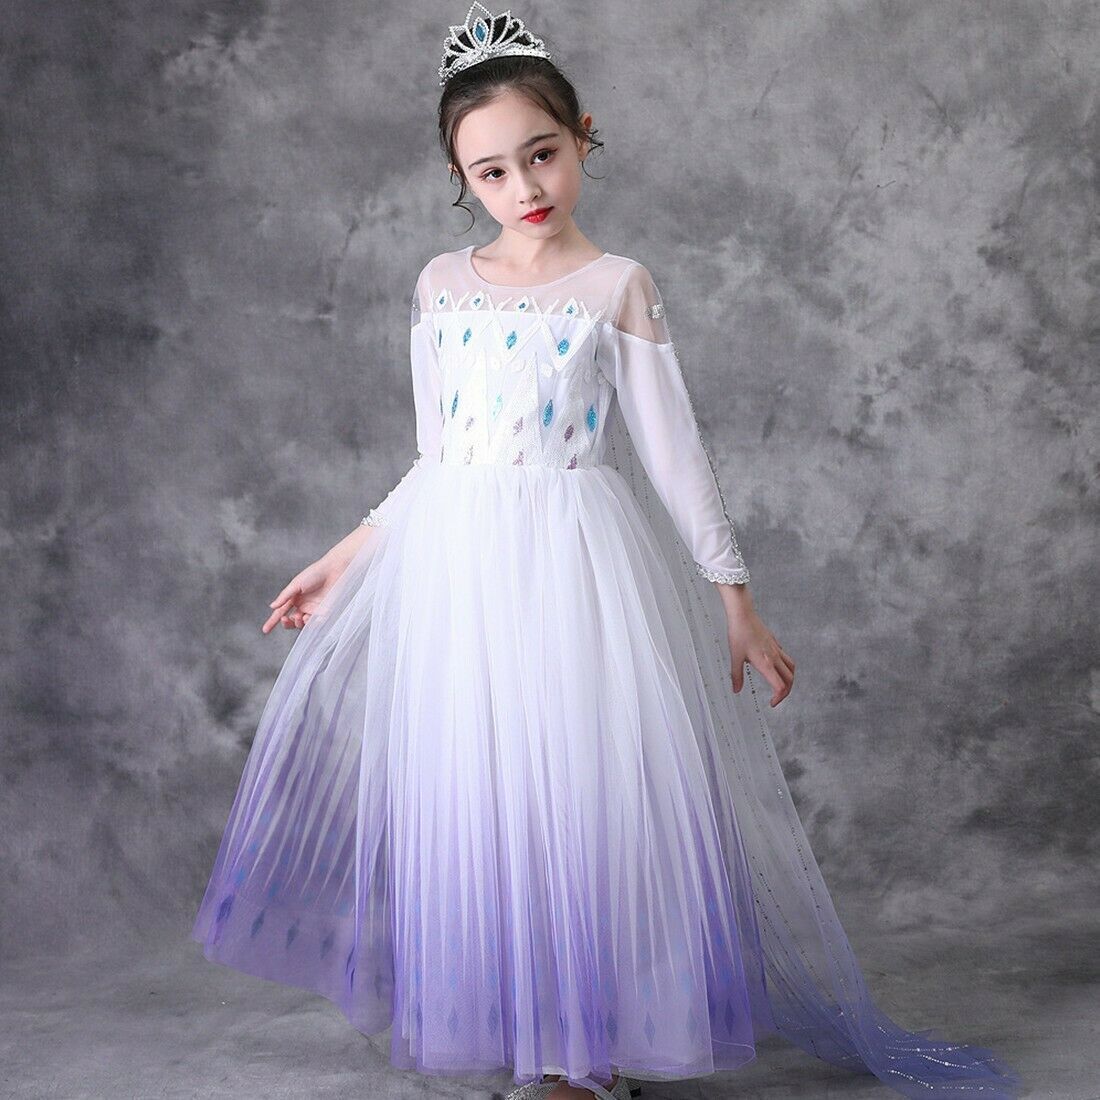 New 2020 Elsa Snow Queen Costume Cosplay Dress Outfit Party Girls With Crown